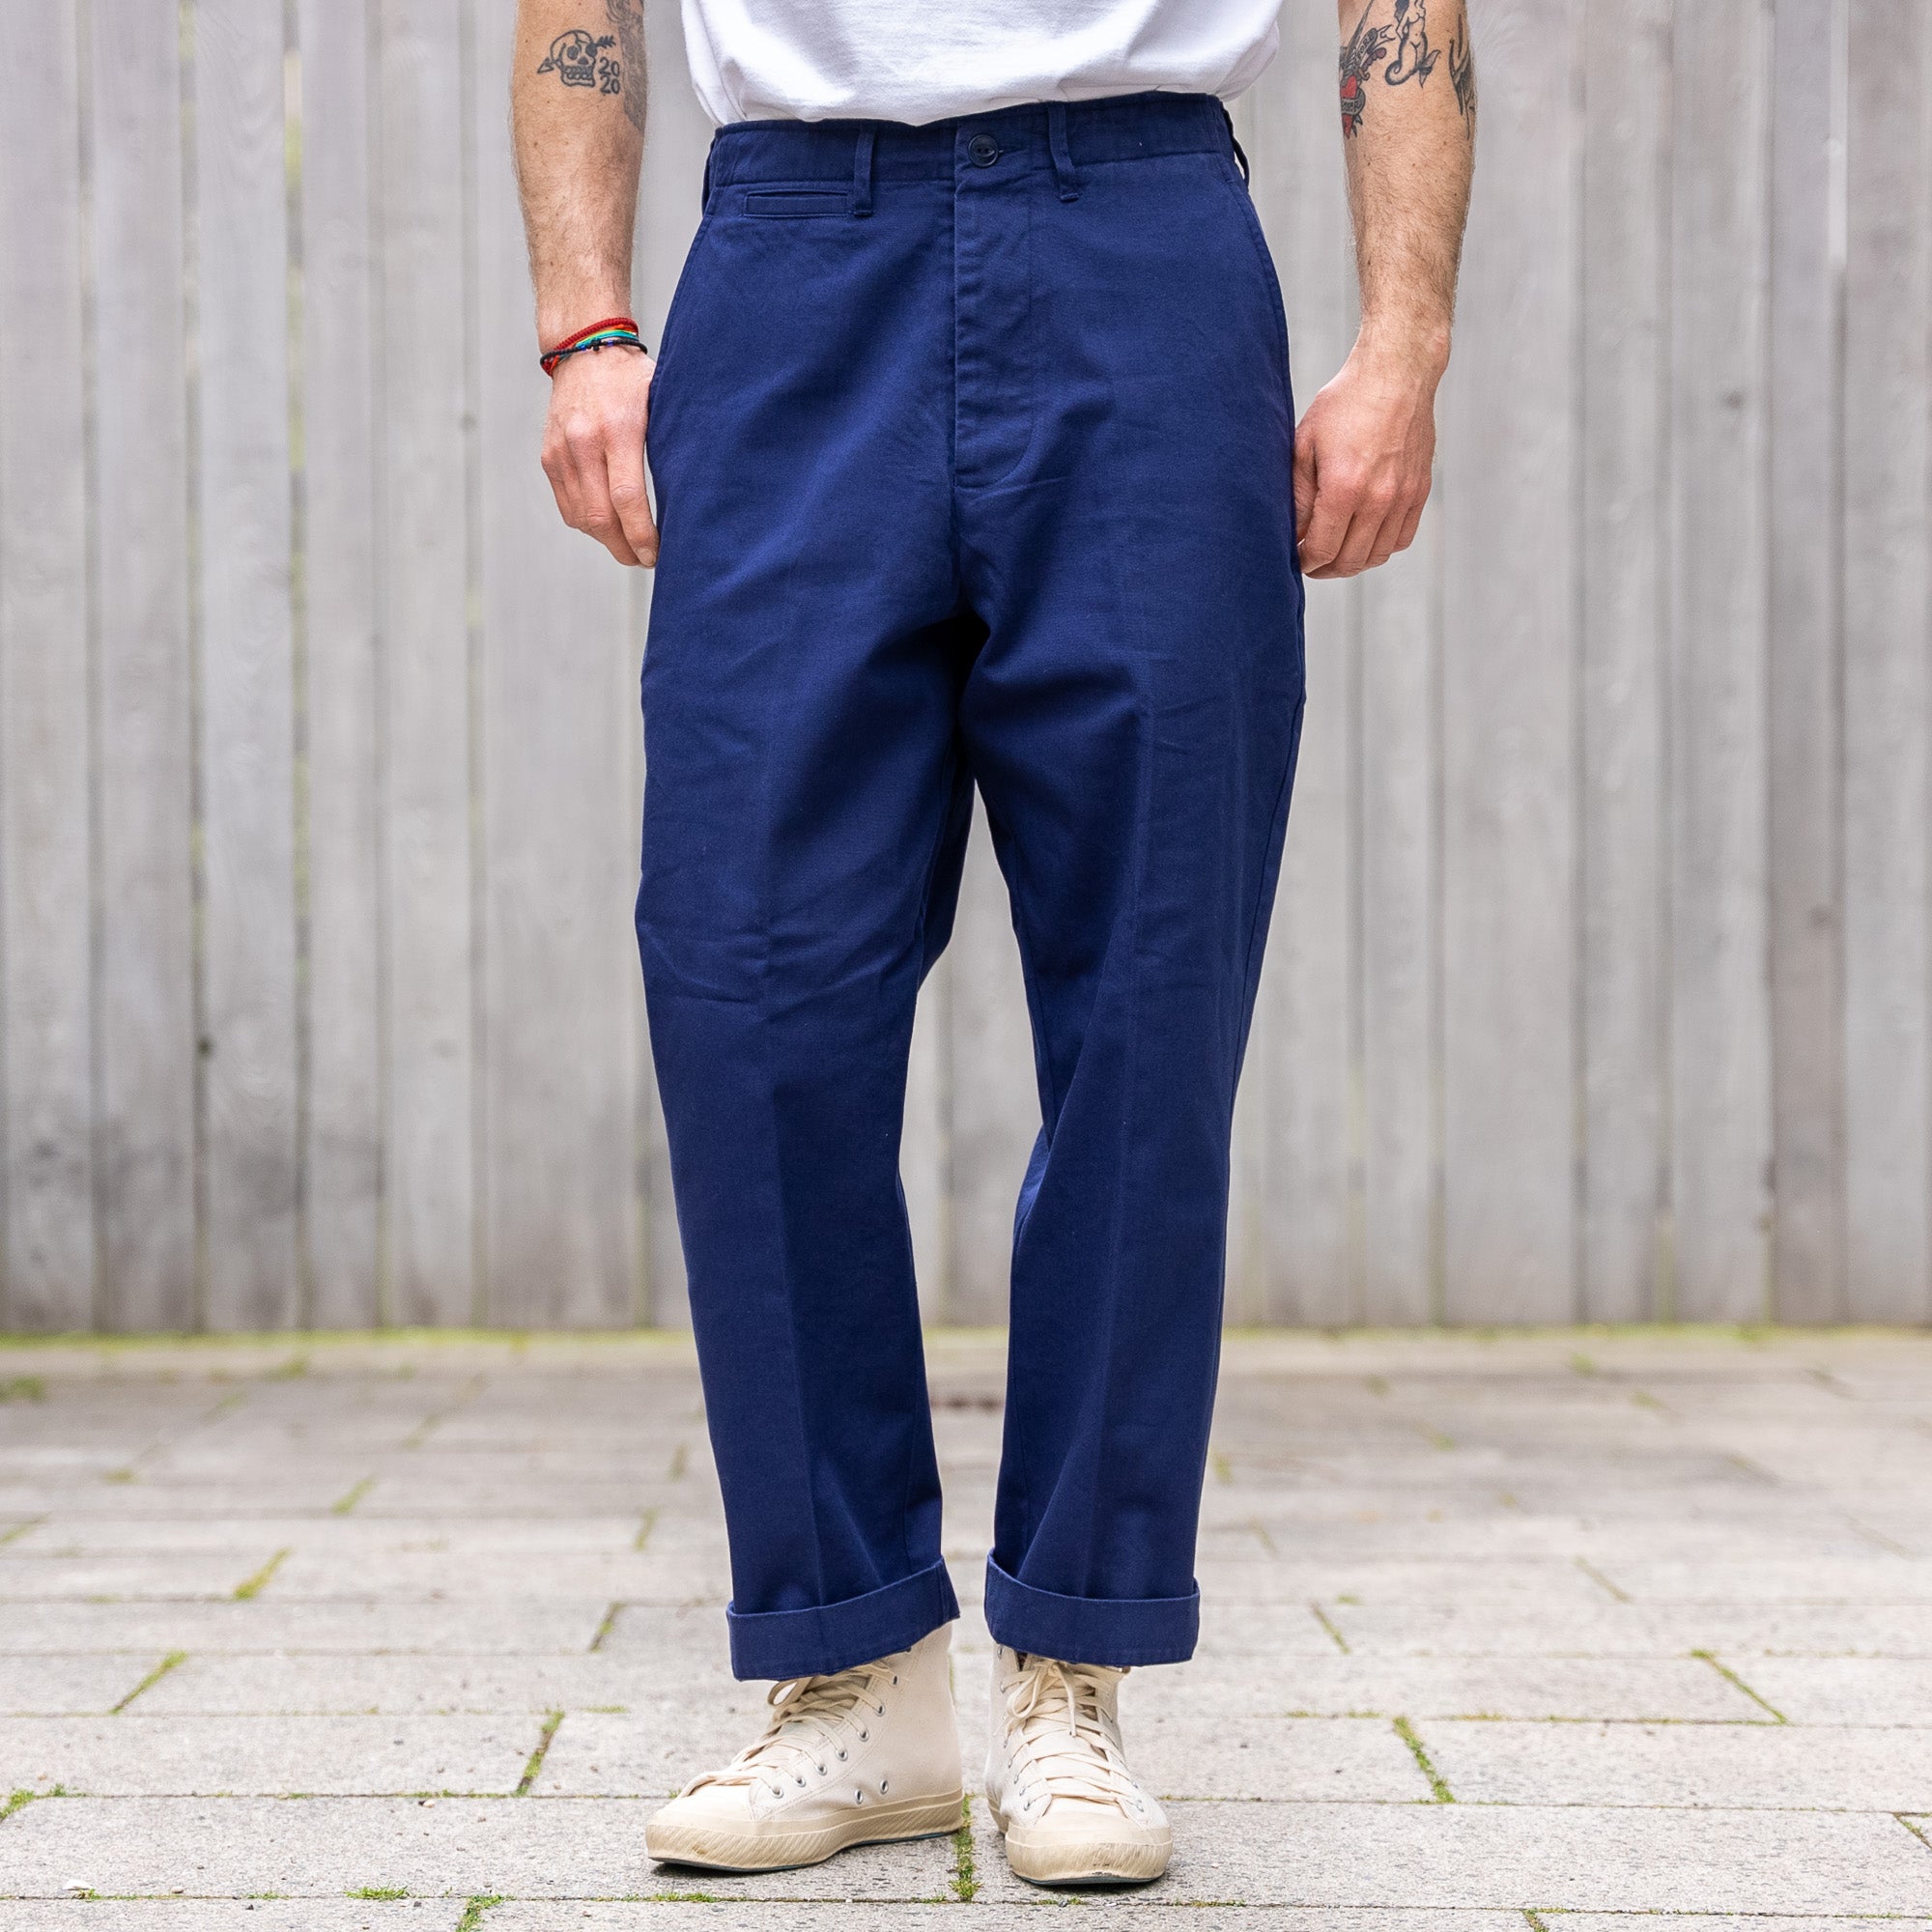 Ink Tapered Chino Pleat Blue Twill – Merz Schwanen / Relaxed b